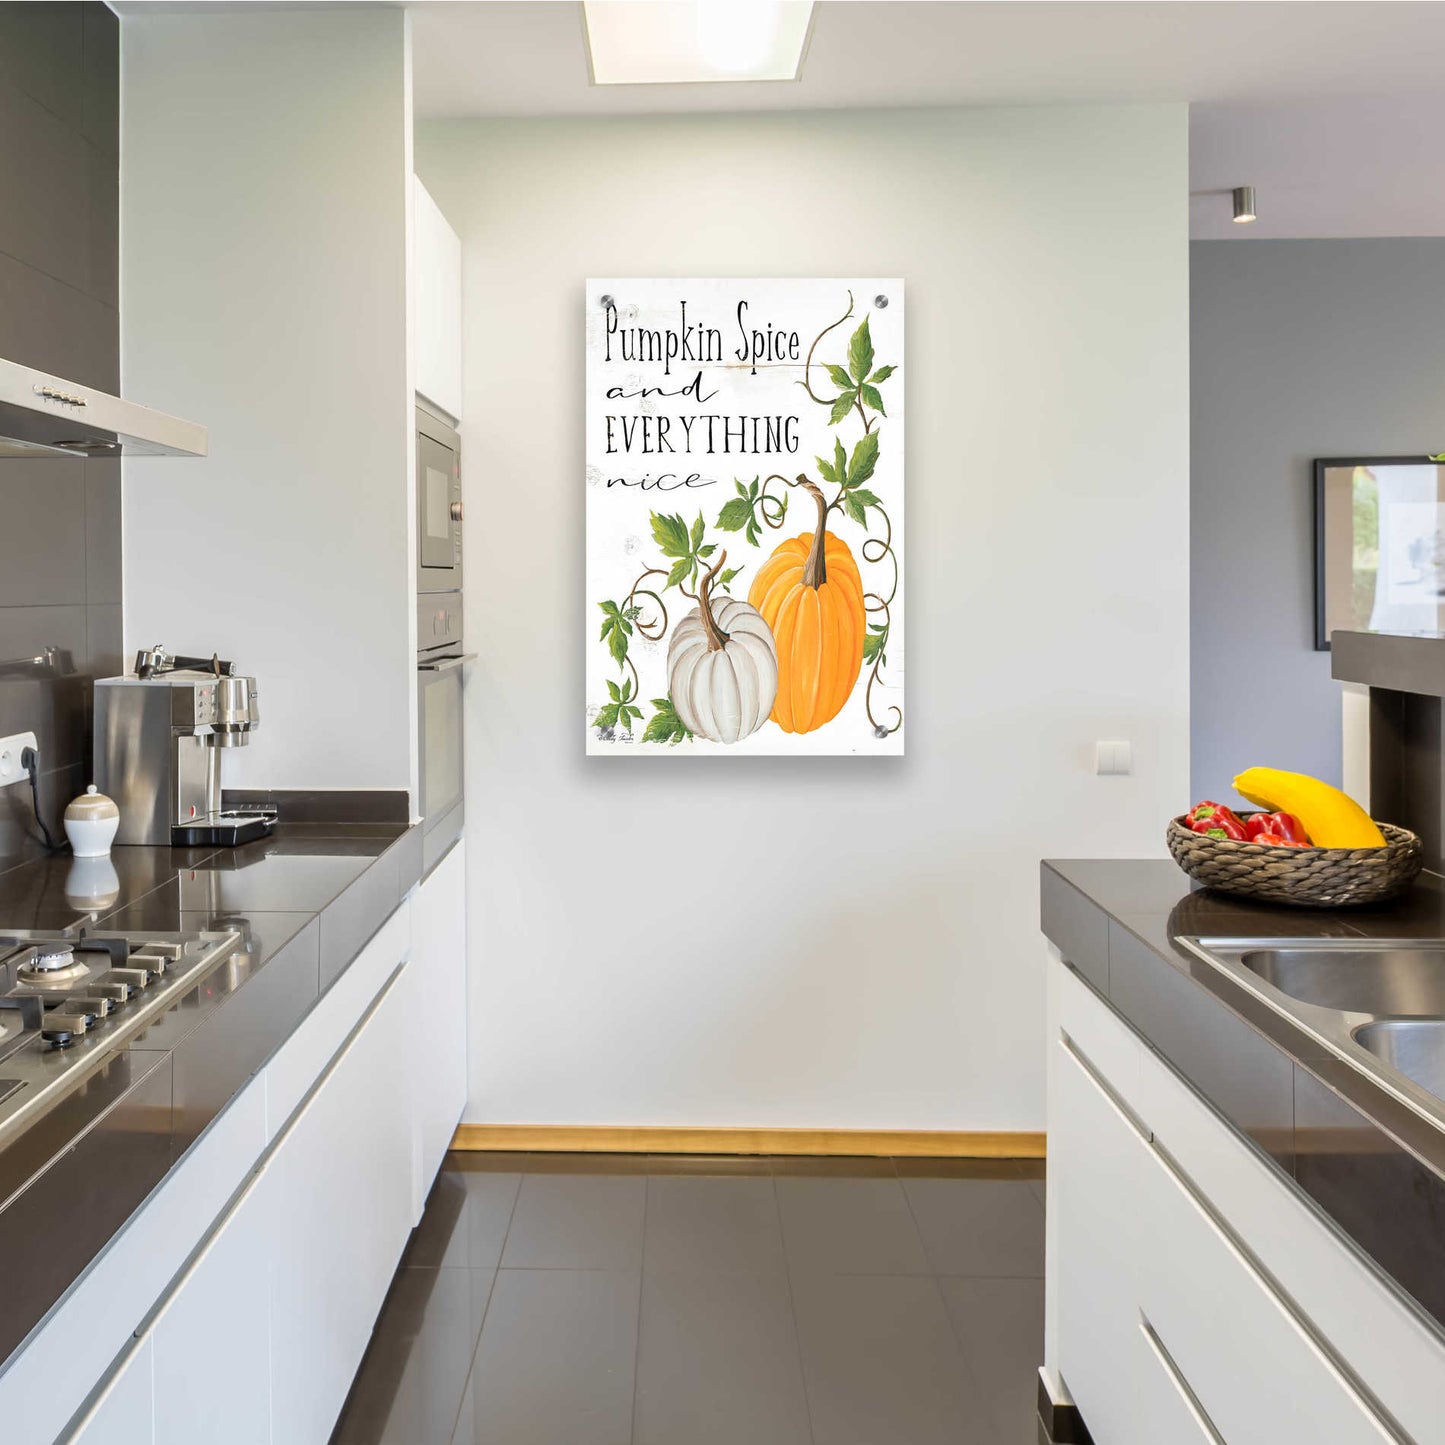 Epic Art 'Pumpkin Spice and Everything Nice' by Cindy Jacobs, Acrylic Glass Wall Art,24x36